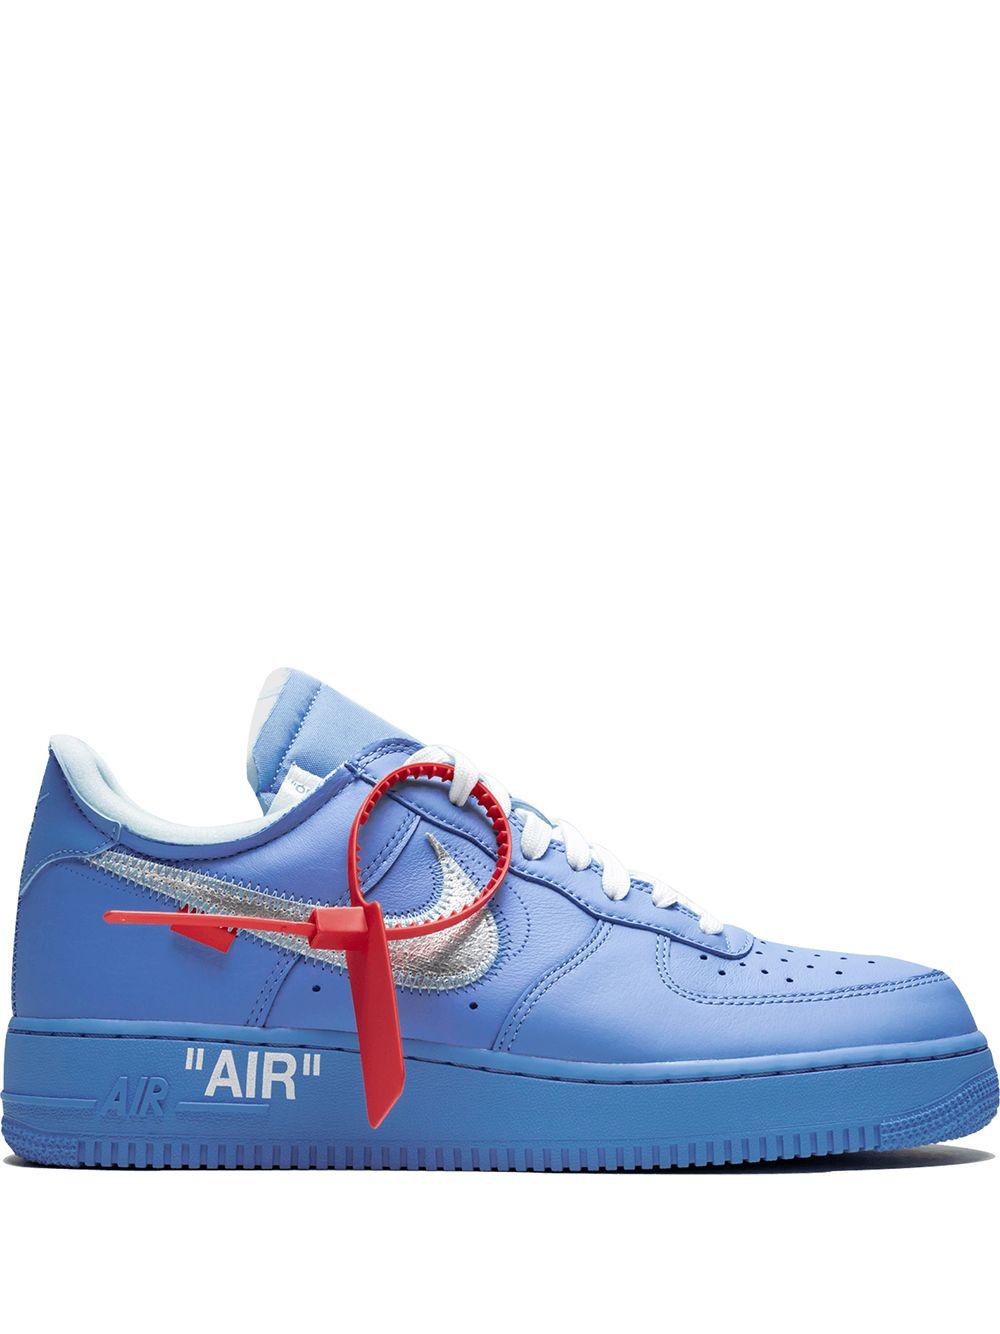 NIKE X OFF-WHITE Air Force 1 Low "mca" Sneakers in Blue | Lyst